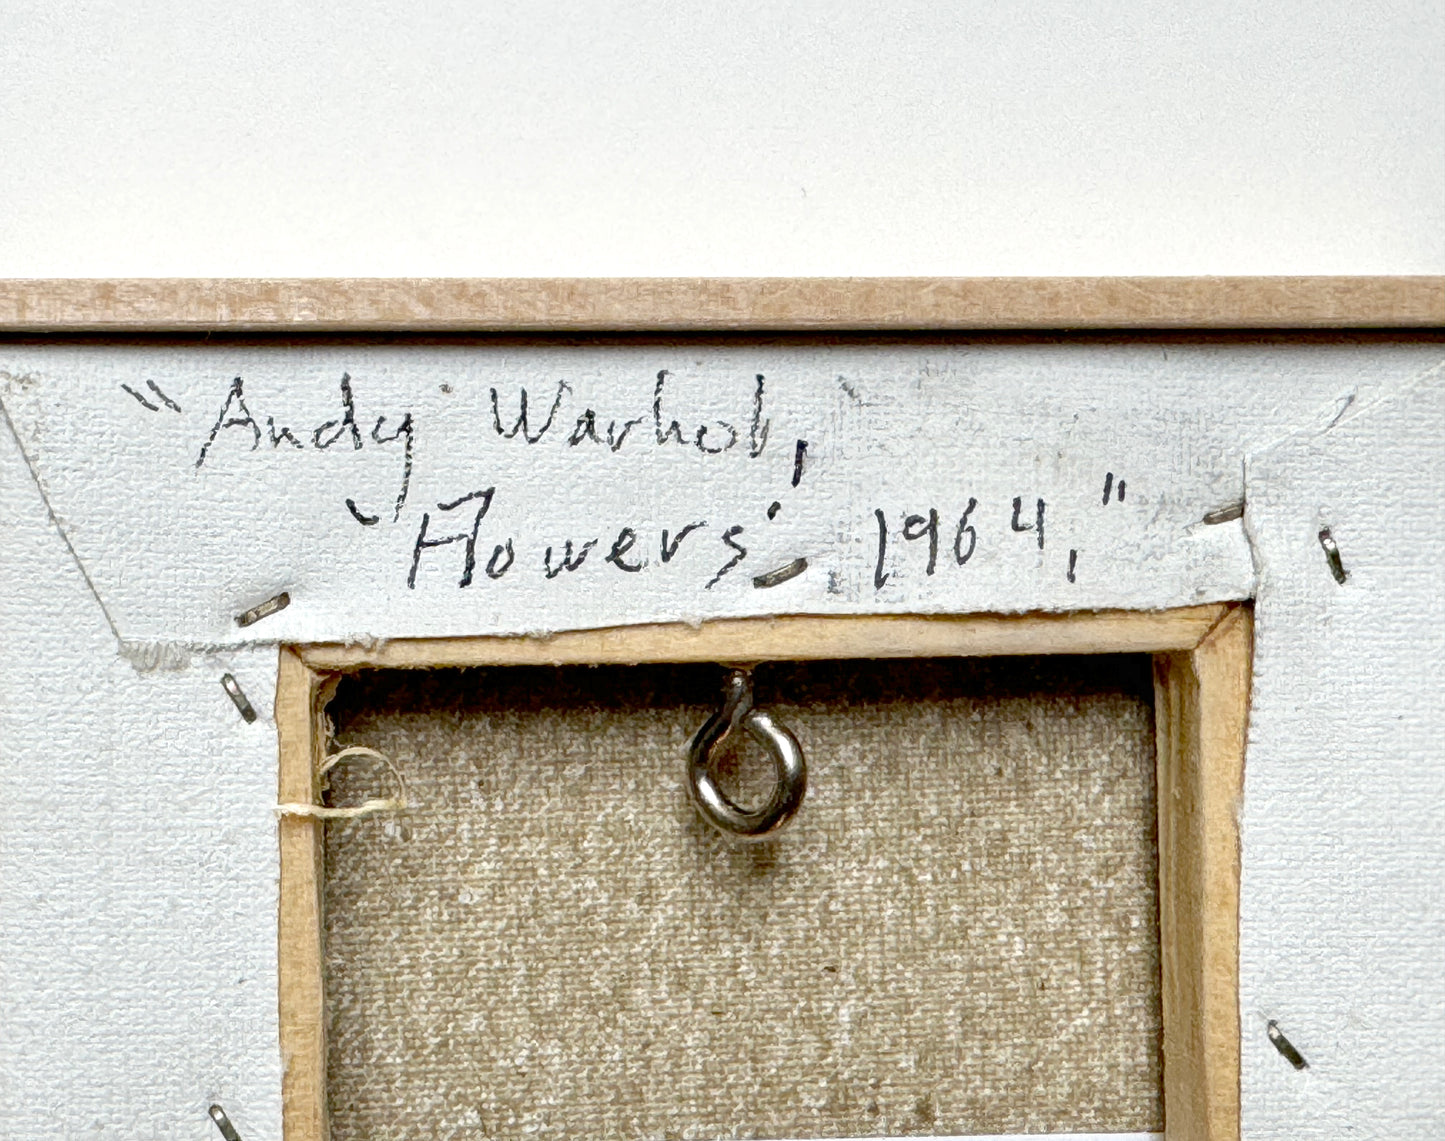 Richard Pettibone Andy Warhol Flowers 1964 Unique Appropriation Signed